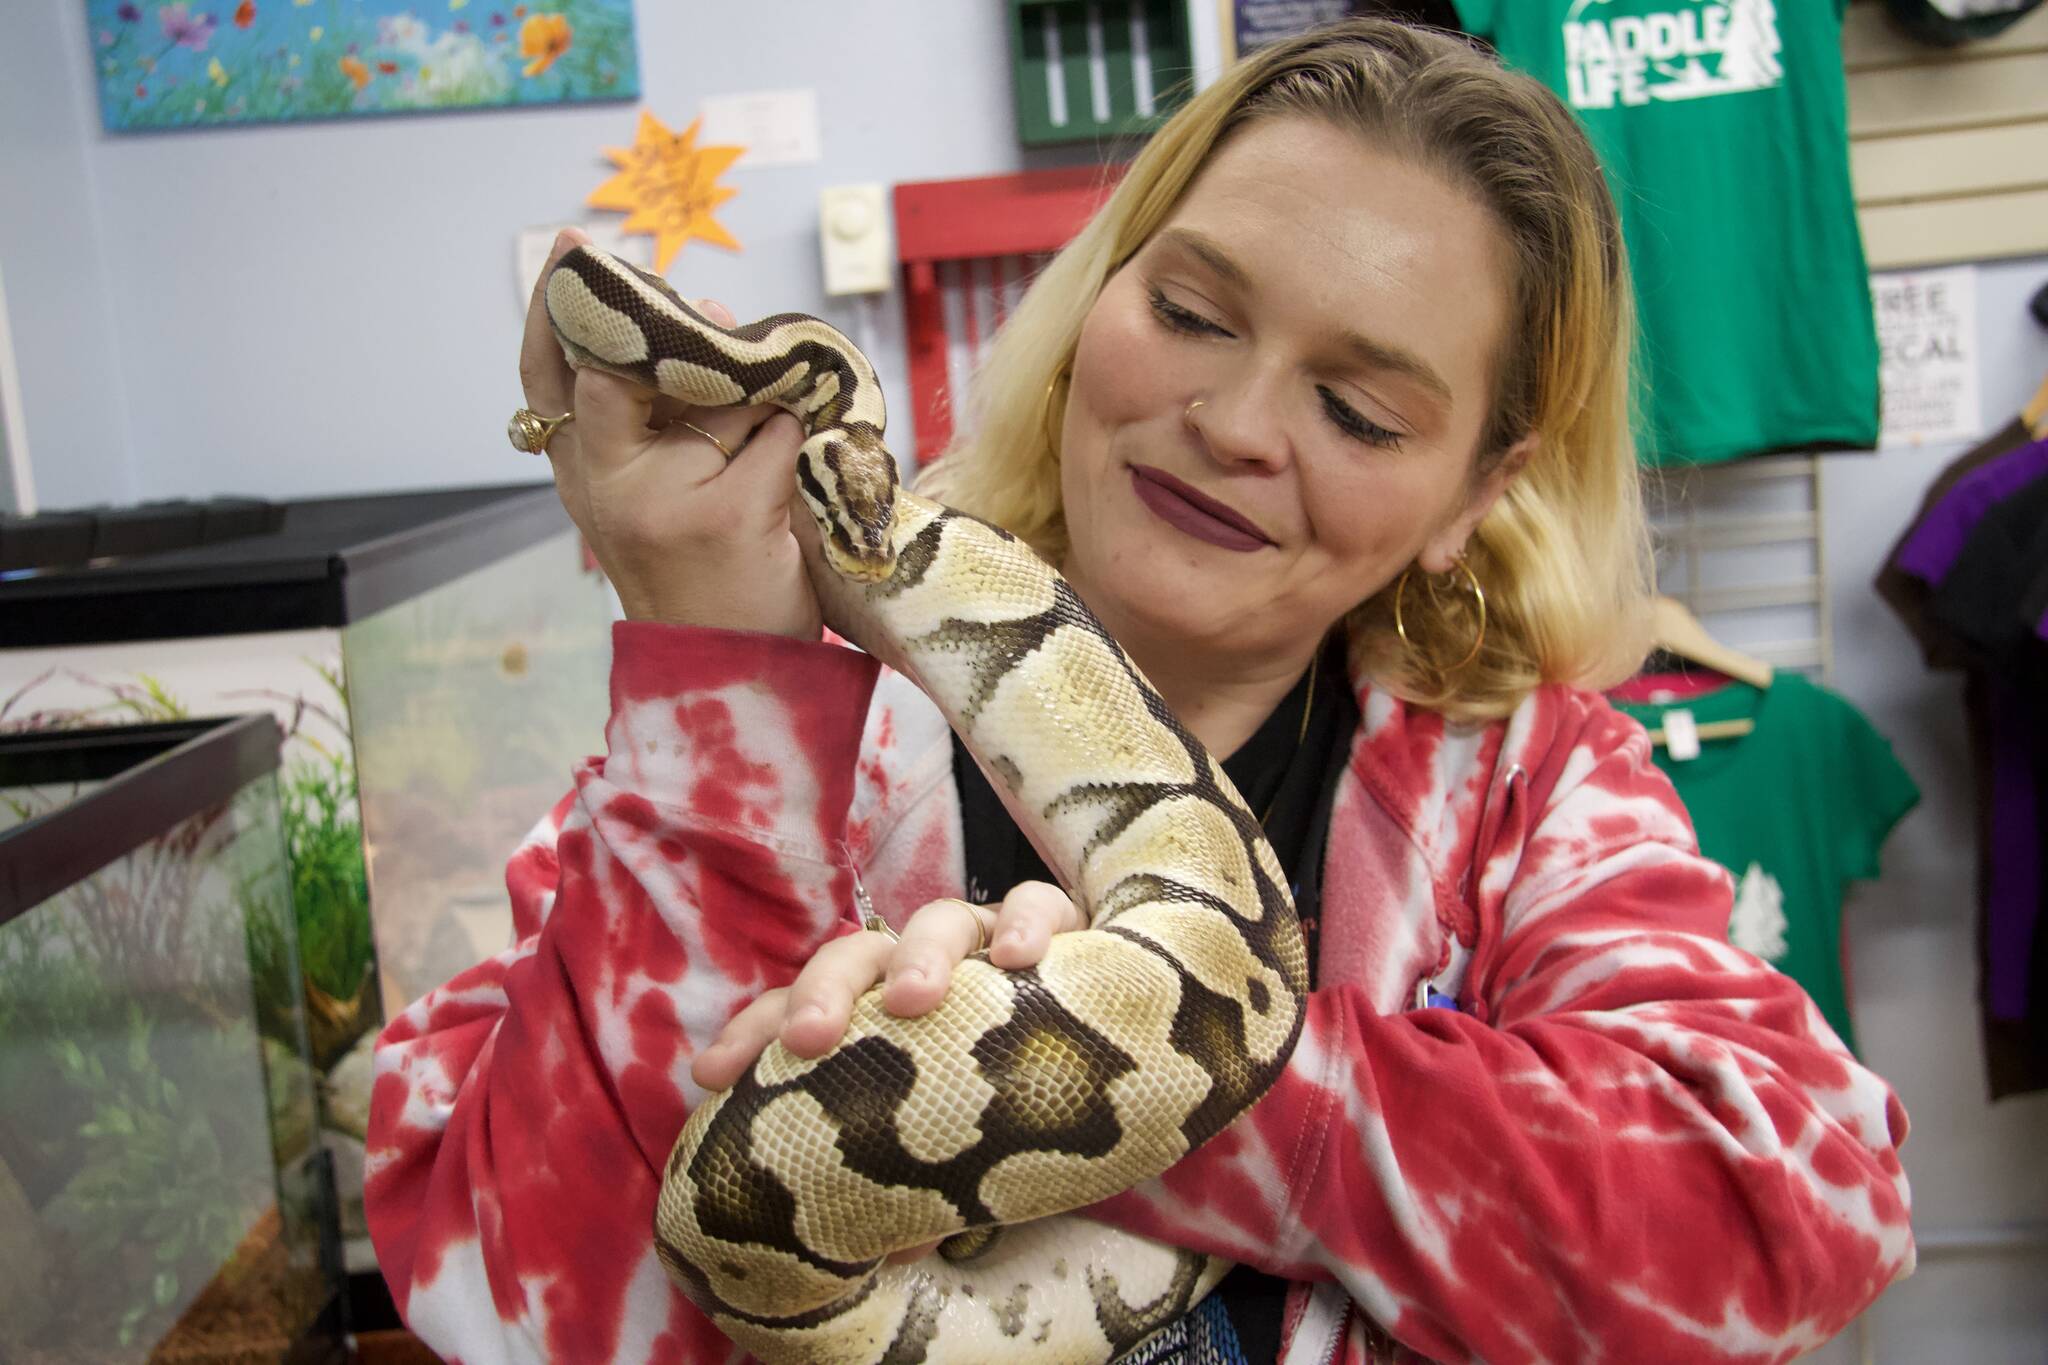 Photo by Rachel Rosen/Whidbey News-Times
Melinda Buchanan with one of the store’s mascots, a snake named Lala.